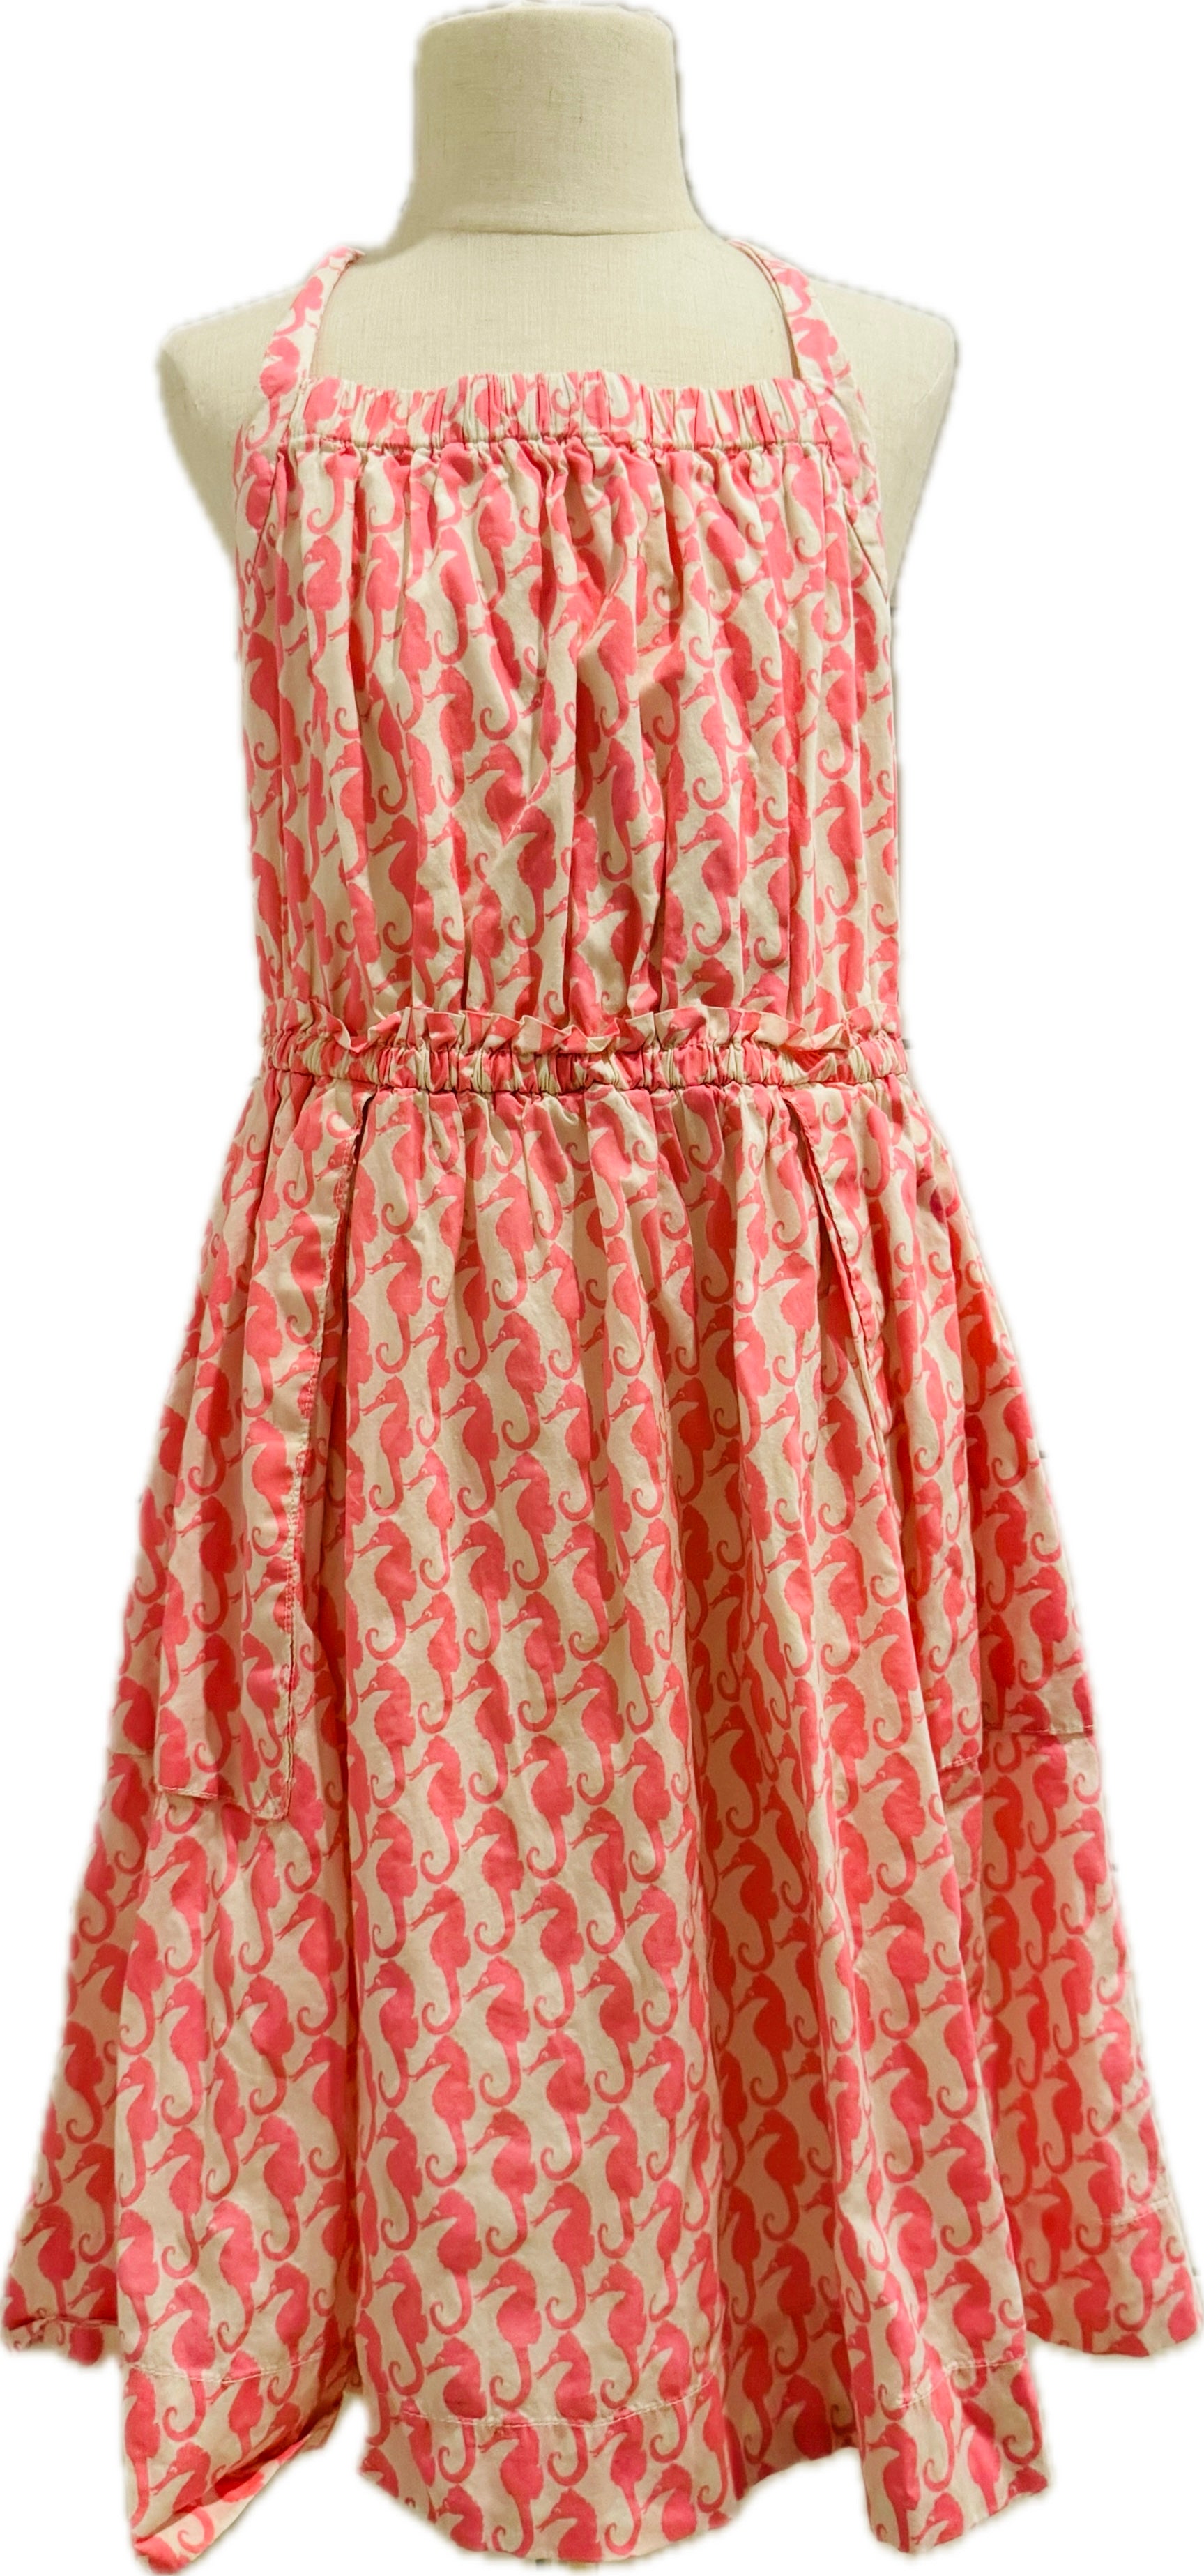 Crewcuts Seahorse Dress, Coral Girls Size 10